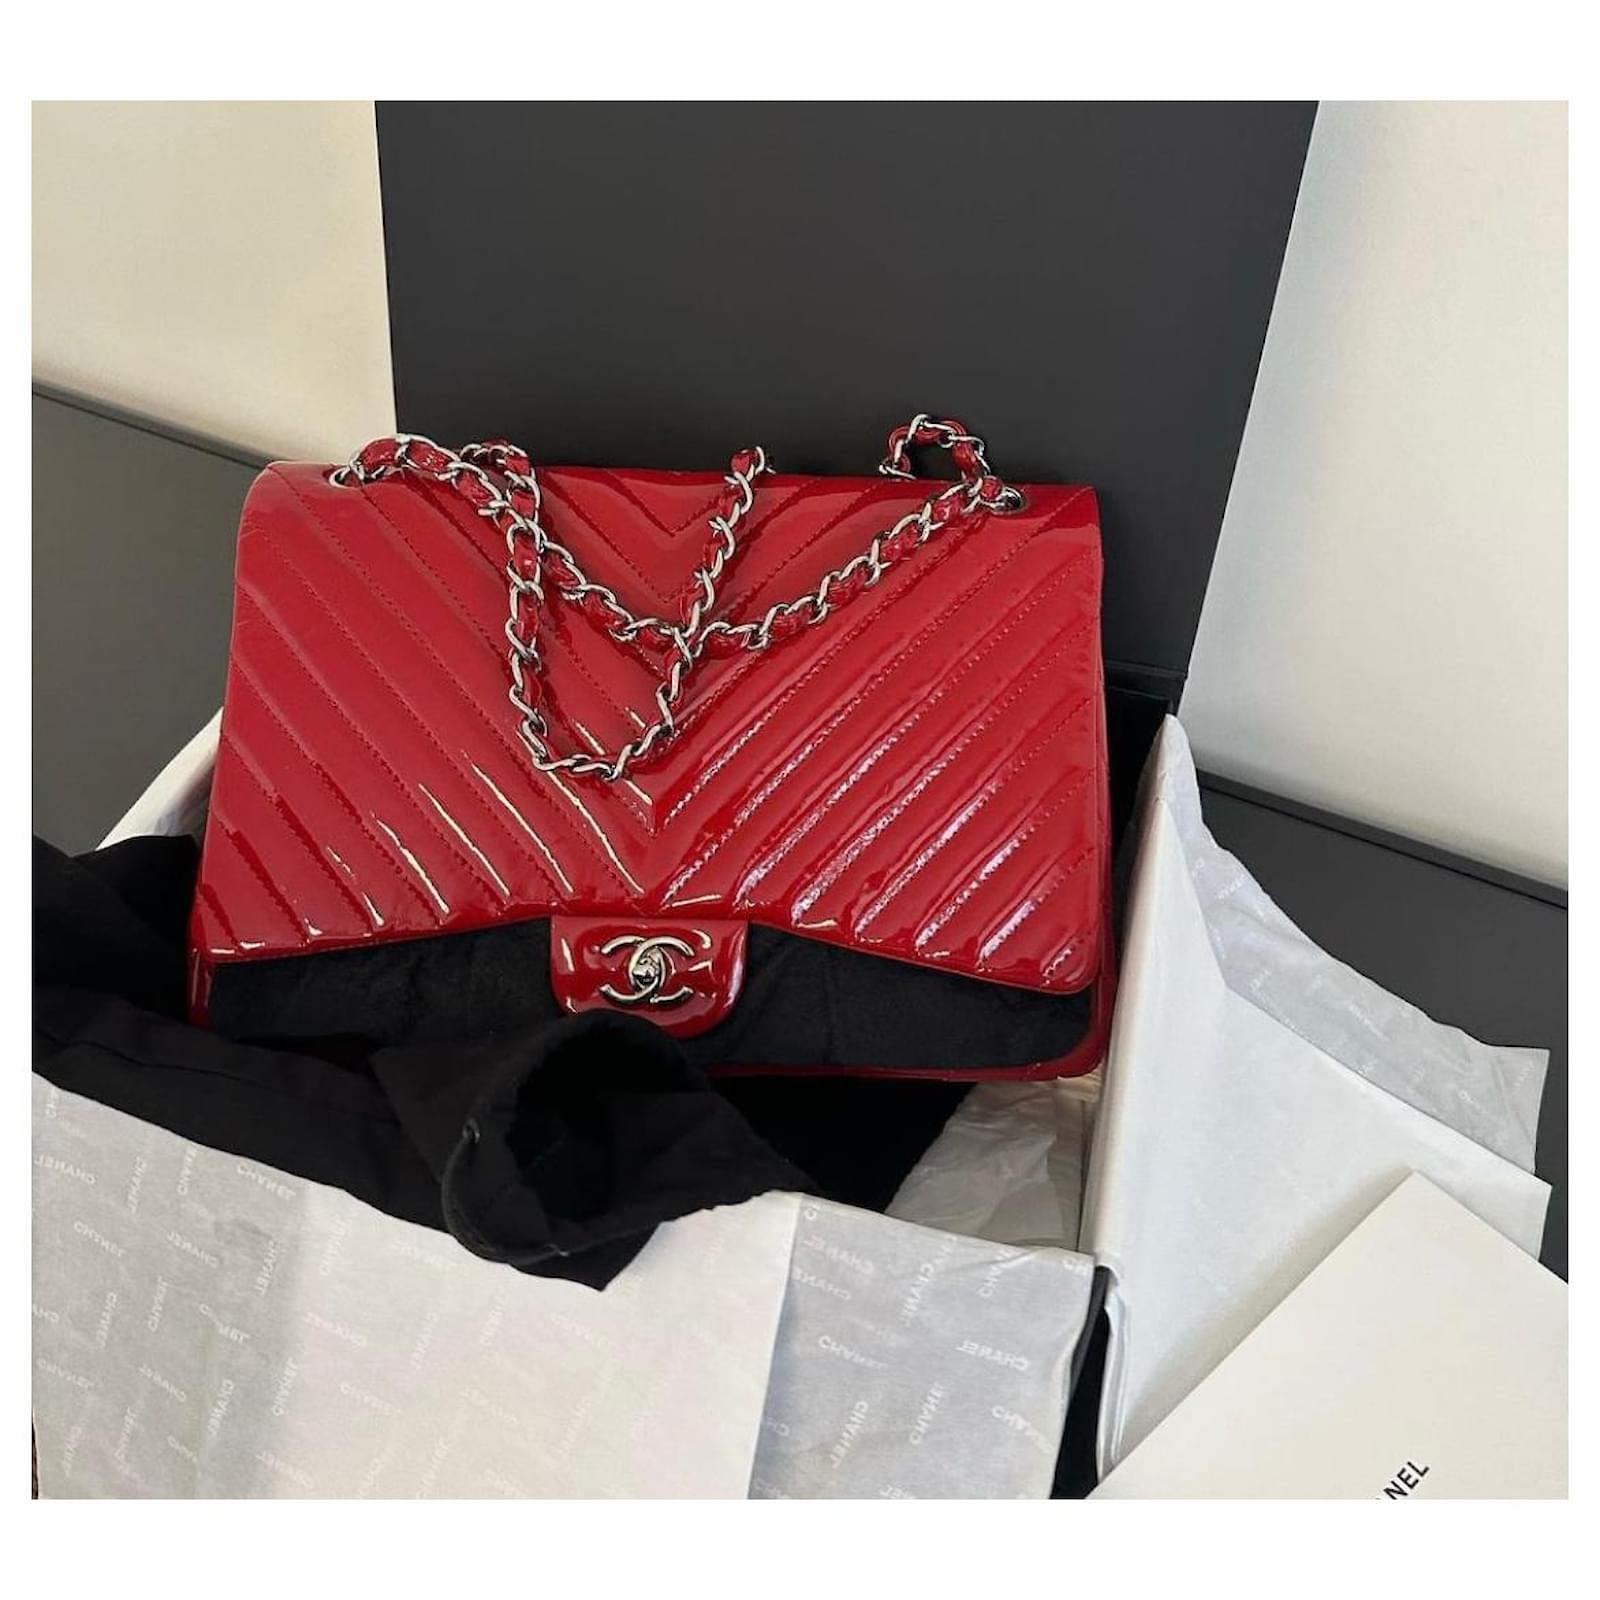 Chanel Red Patent Leather Timeless Classic Maxi Chevron Flap Bag with  Silver Hardware.